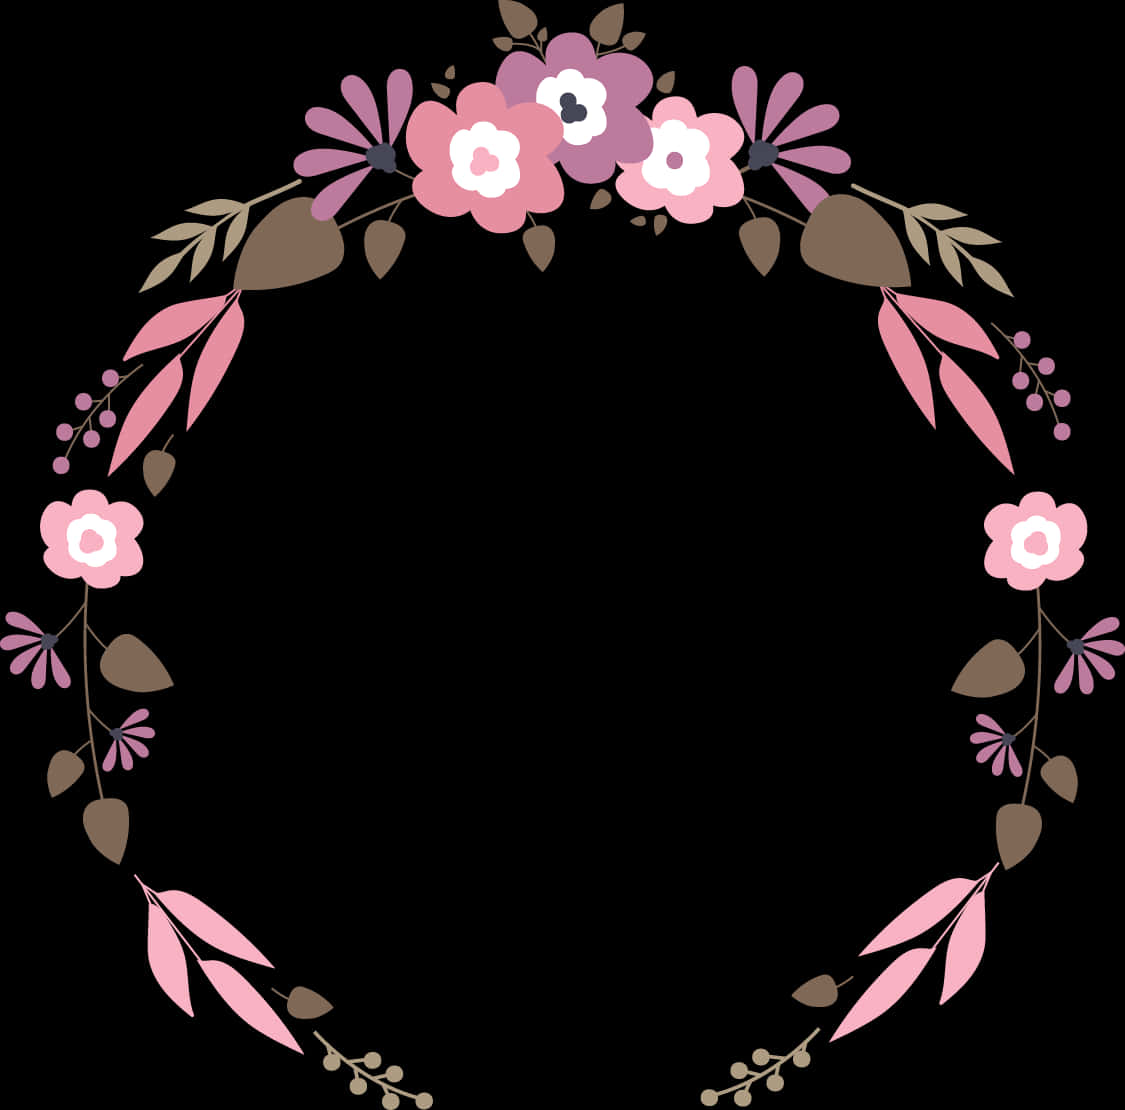 A Circular Floral Frame With Pink Flowers And Leaves